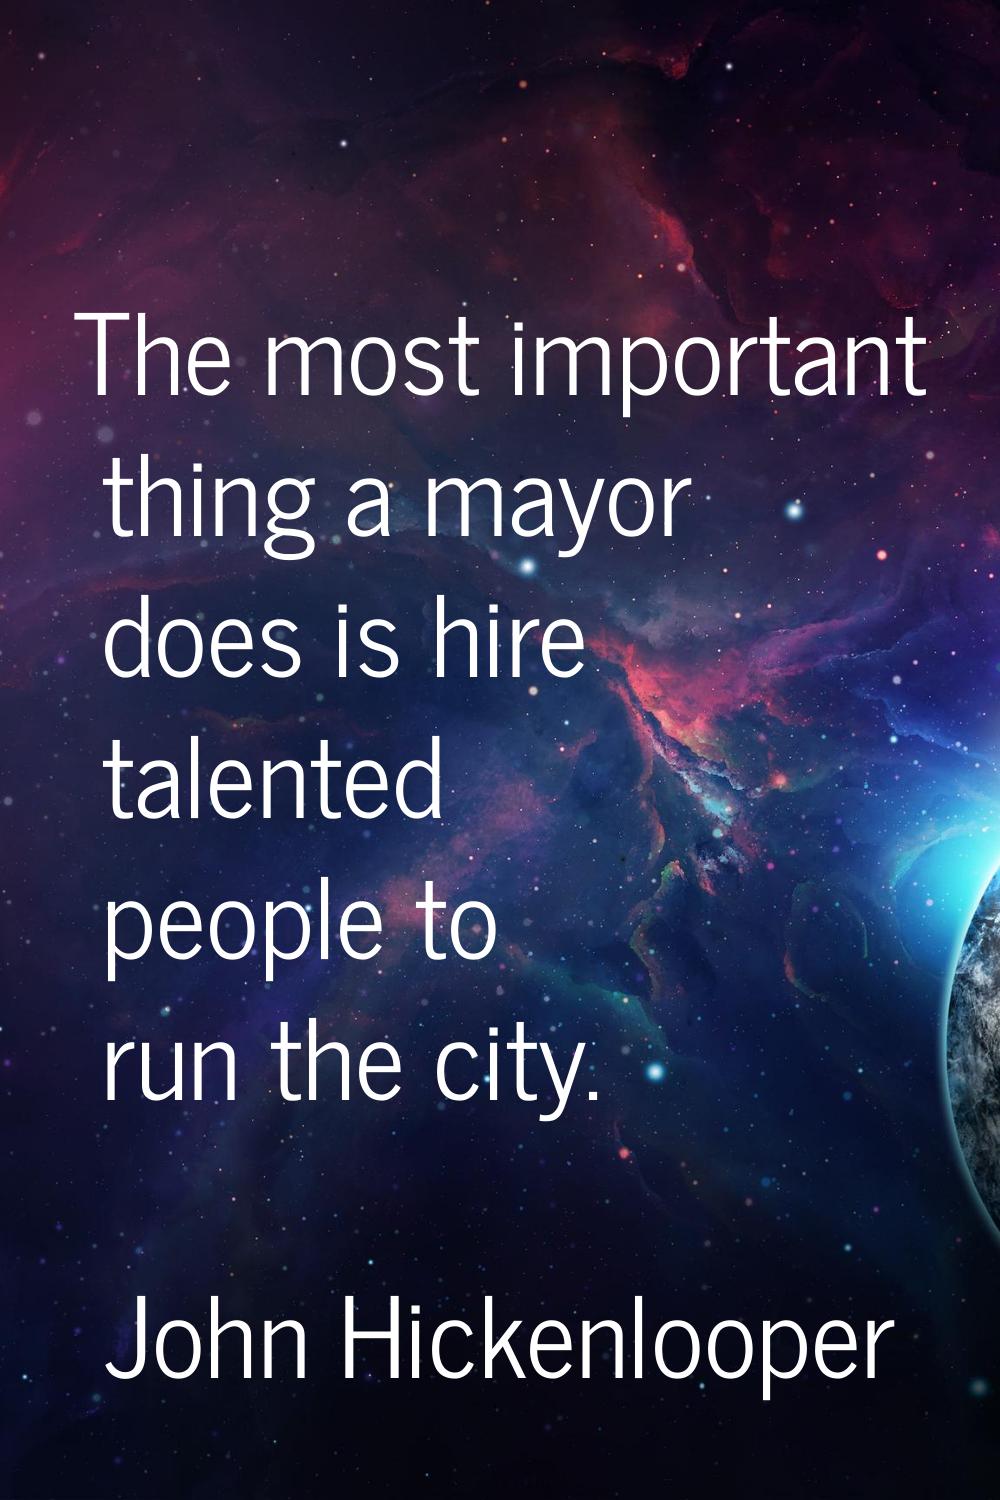 The most important thing a mayor does is hire talented people to run the city.